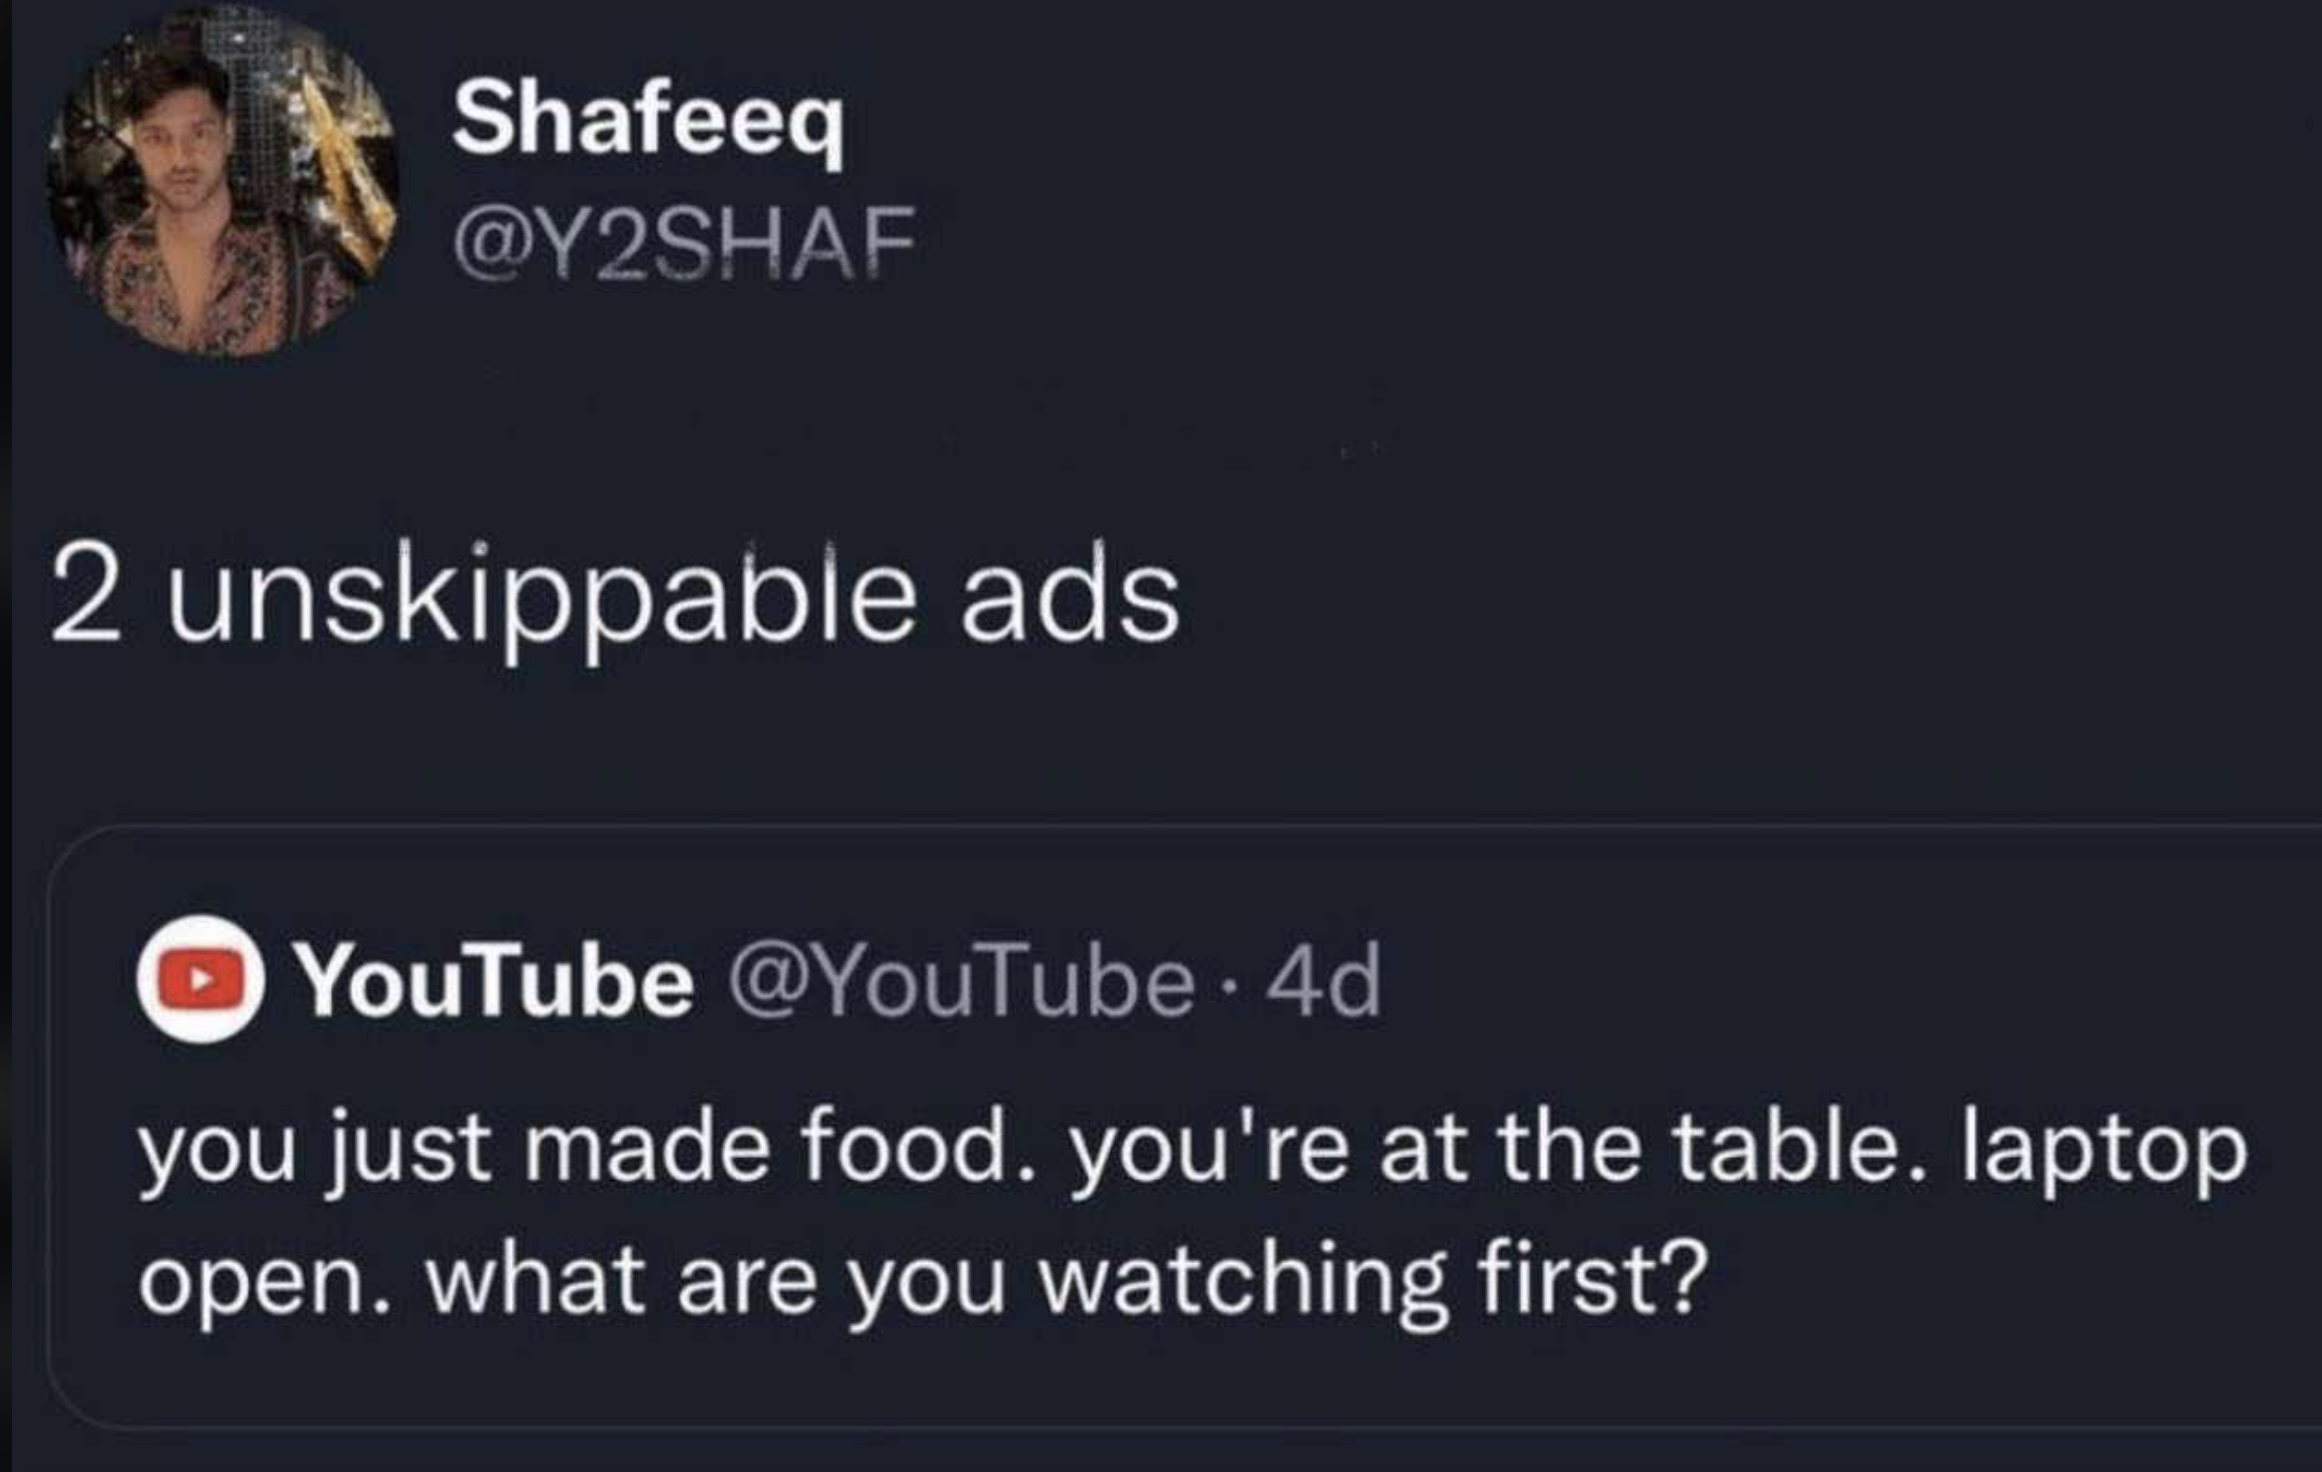 screenshot - Shafeeq 2 unskippable ads YouTube . 4d you just made food. you're at the table. laptop open. what are you watching first?